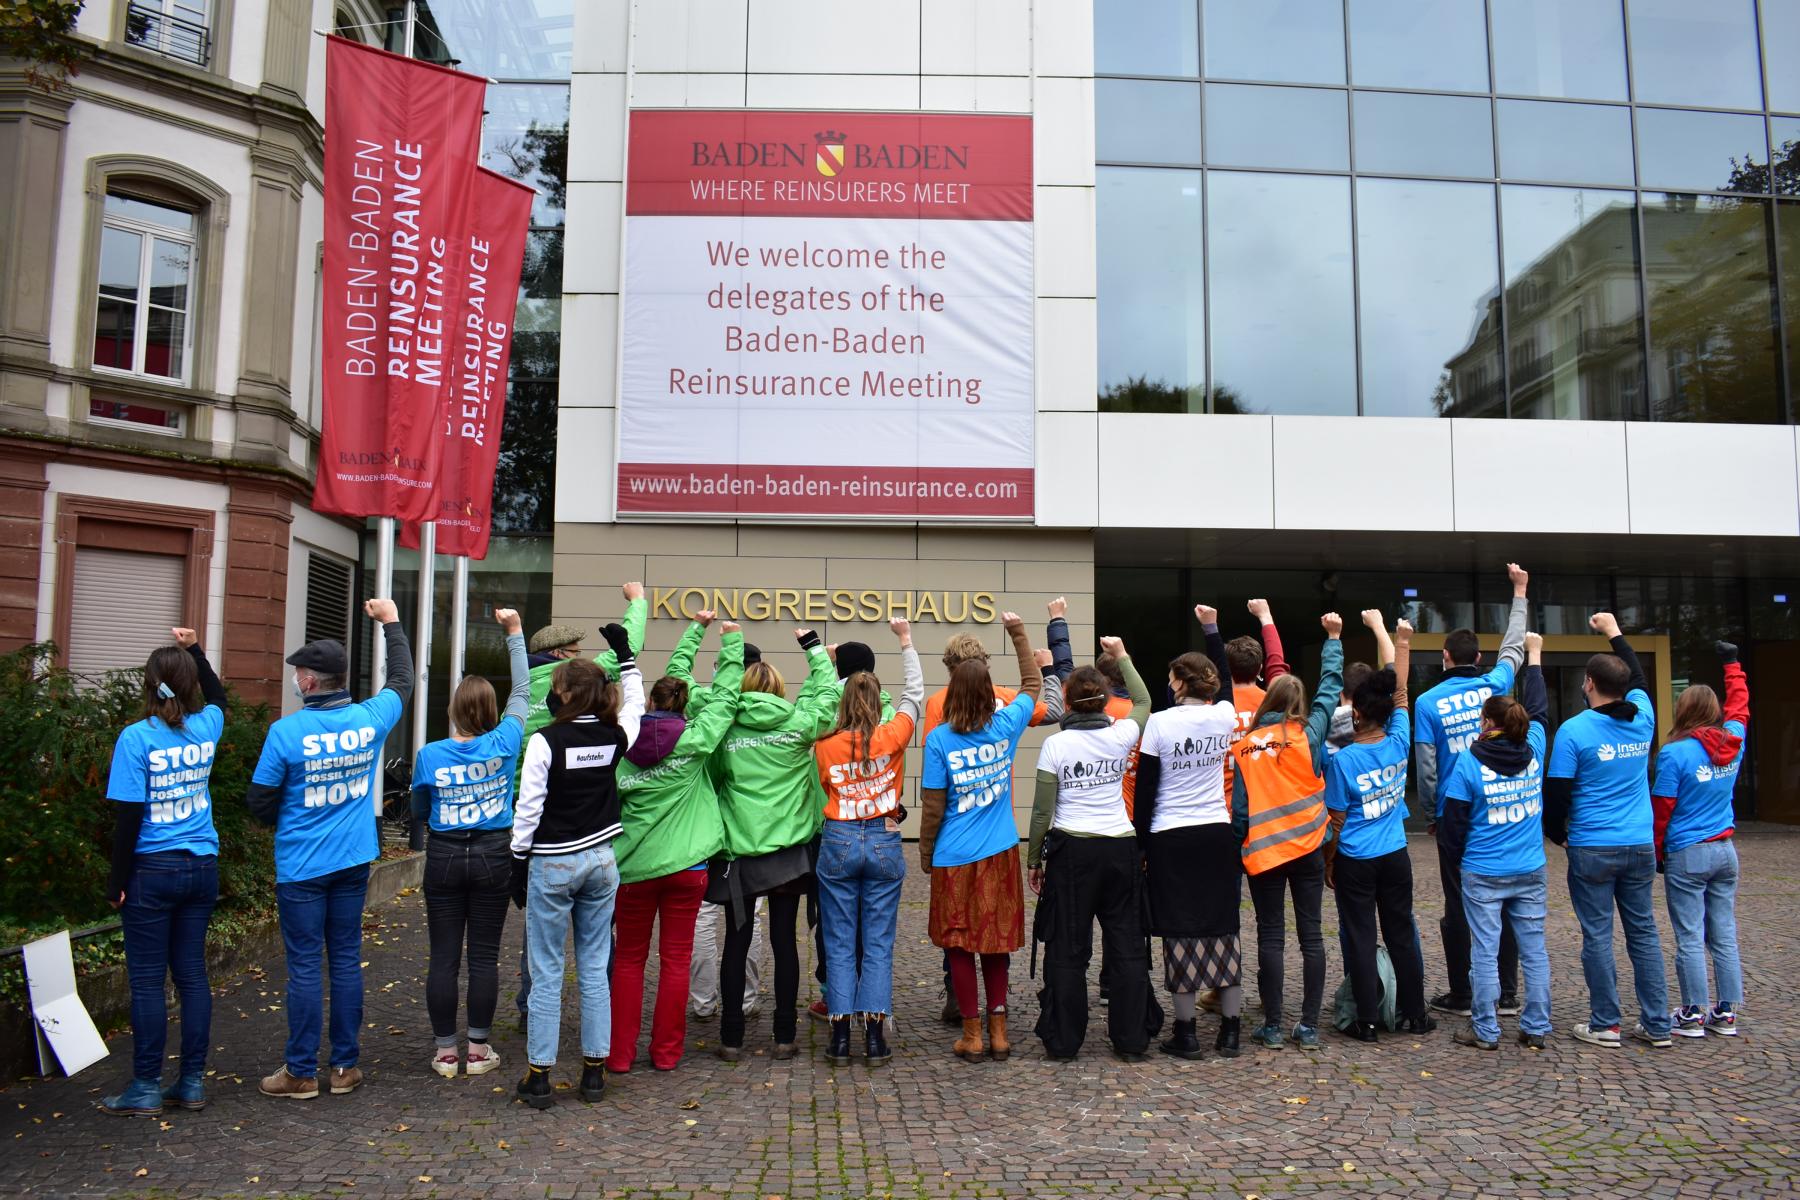 Climate at BadenBaden Conference call for end to fossil fuel insurance